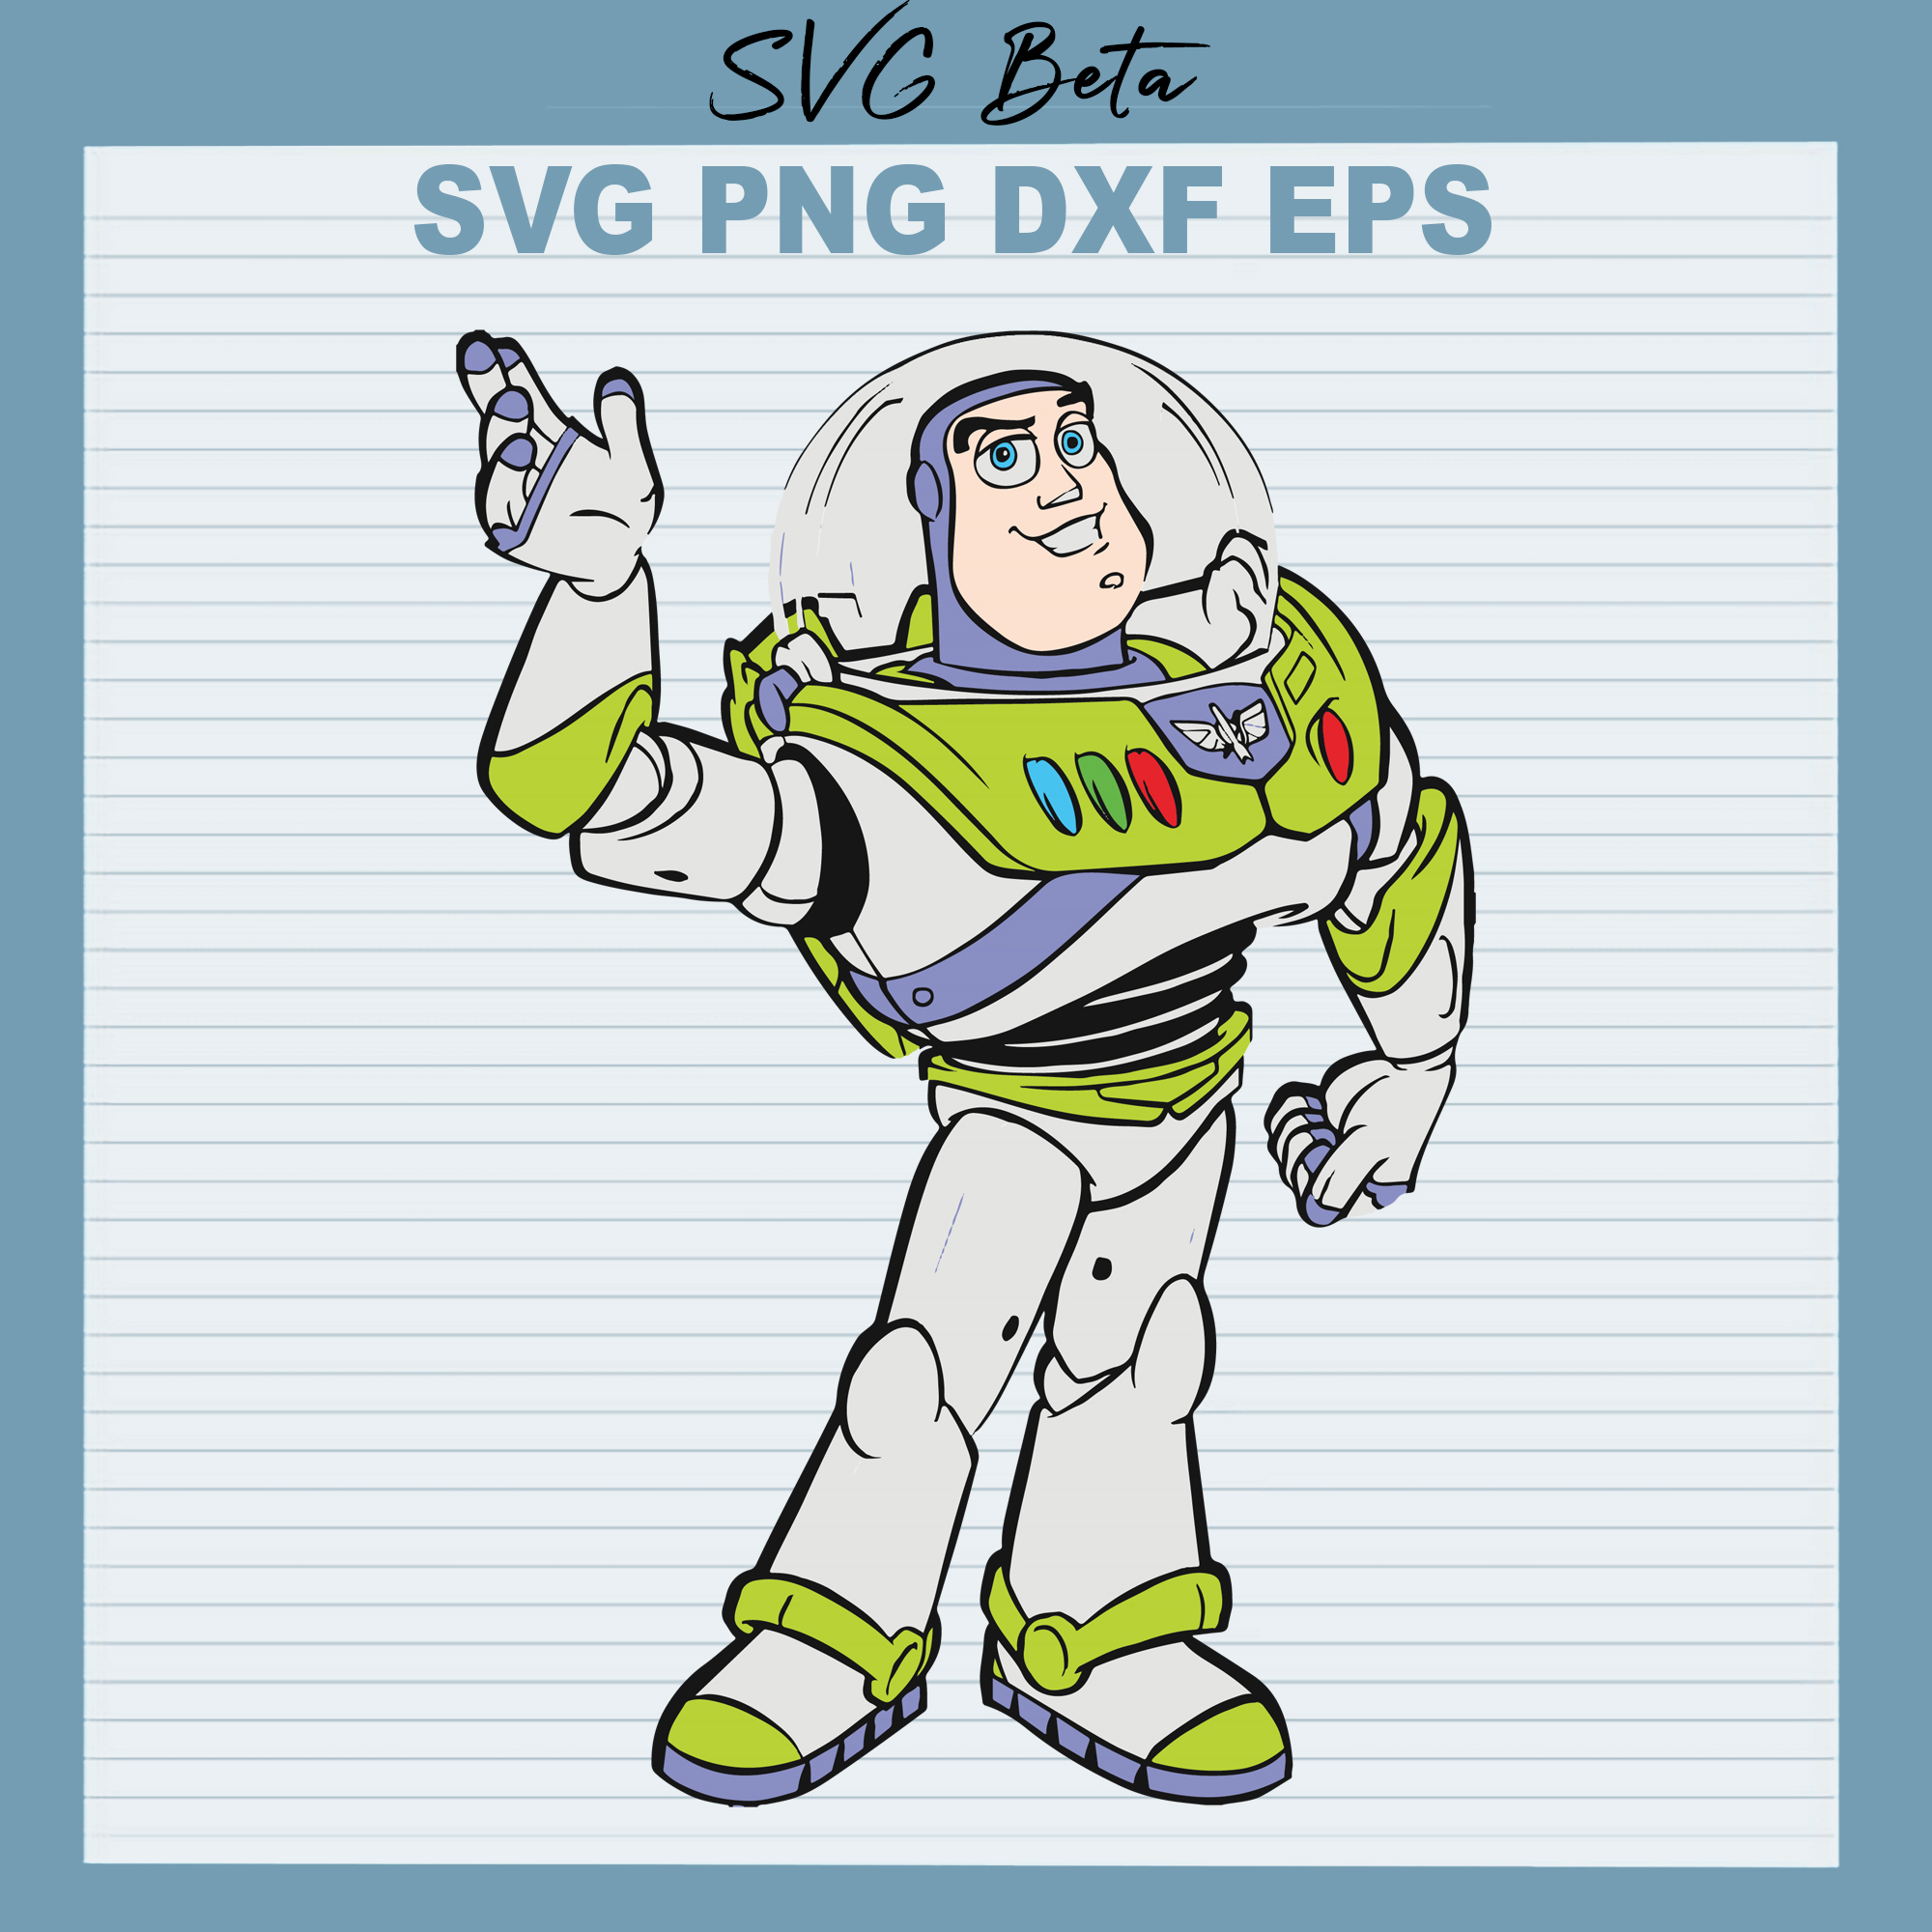 Buzz Lightyear toy story high quality SVG cut files for handmade products